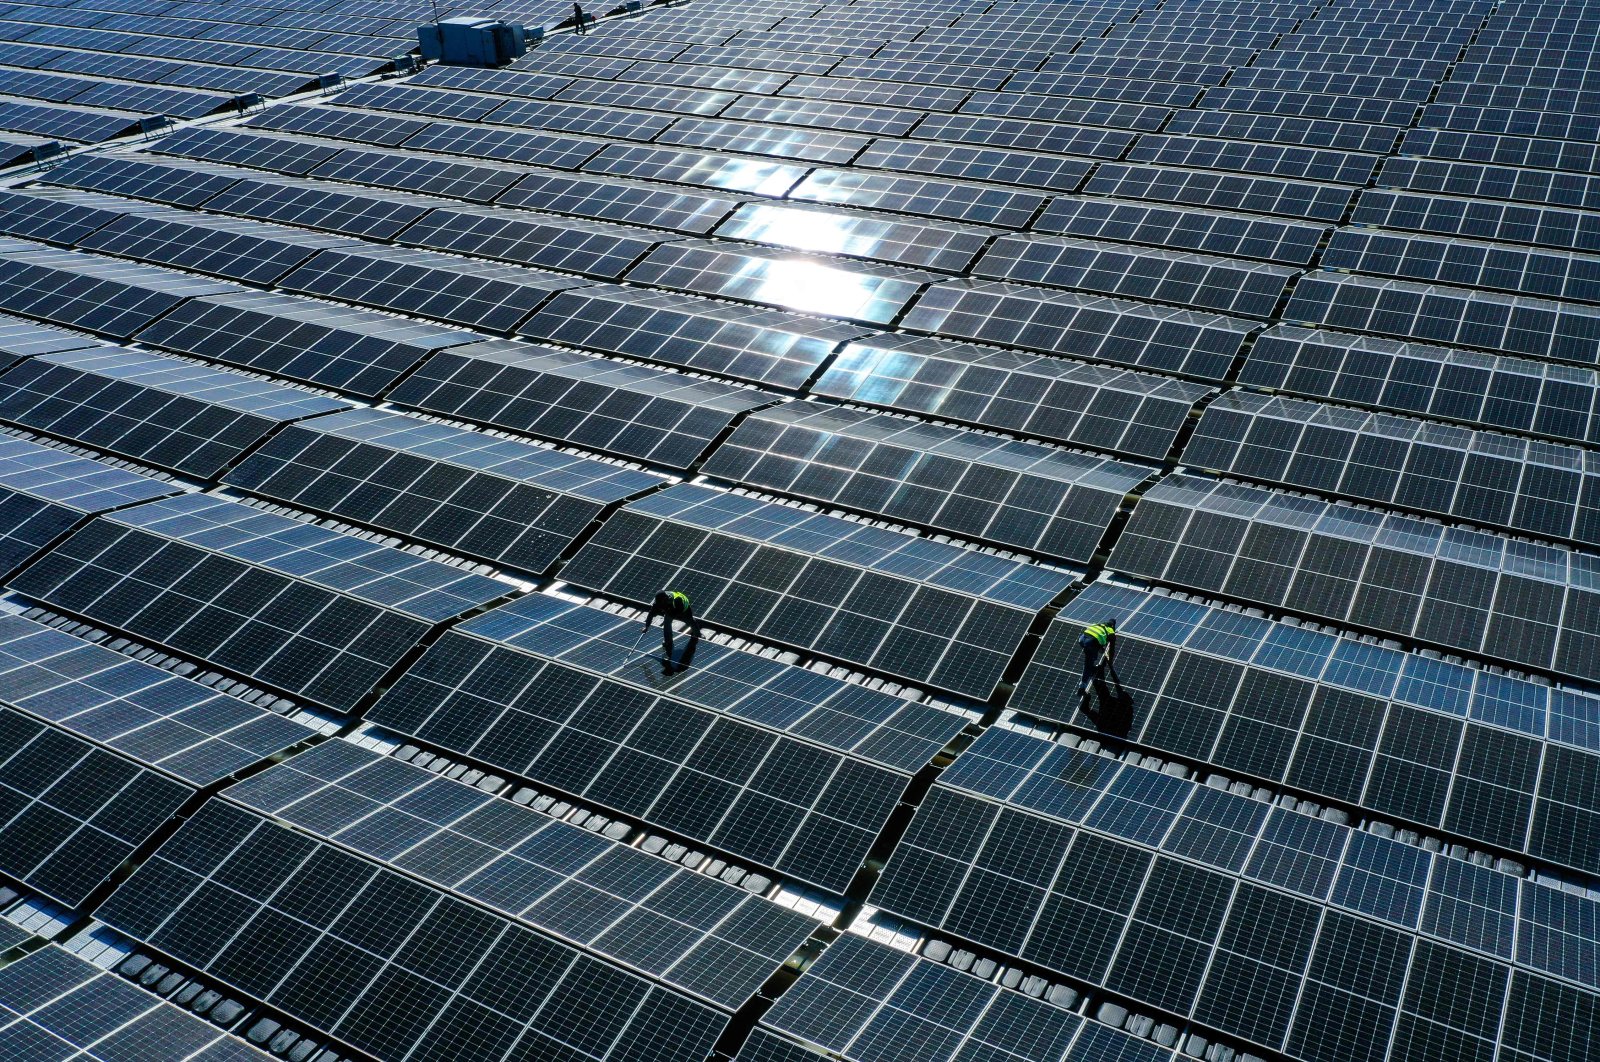 Workers assemble solar panels at a floating photovoltaic plant on the Silbersee lake in Haltern, western Germany, April 22, 2022. (AFP Photo)